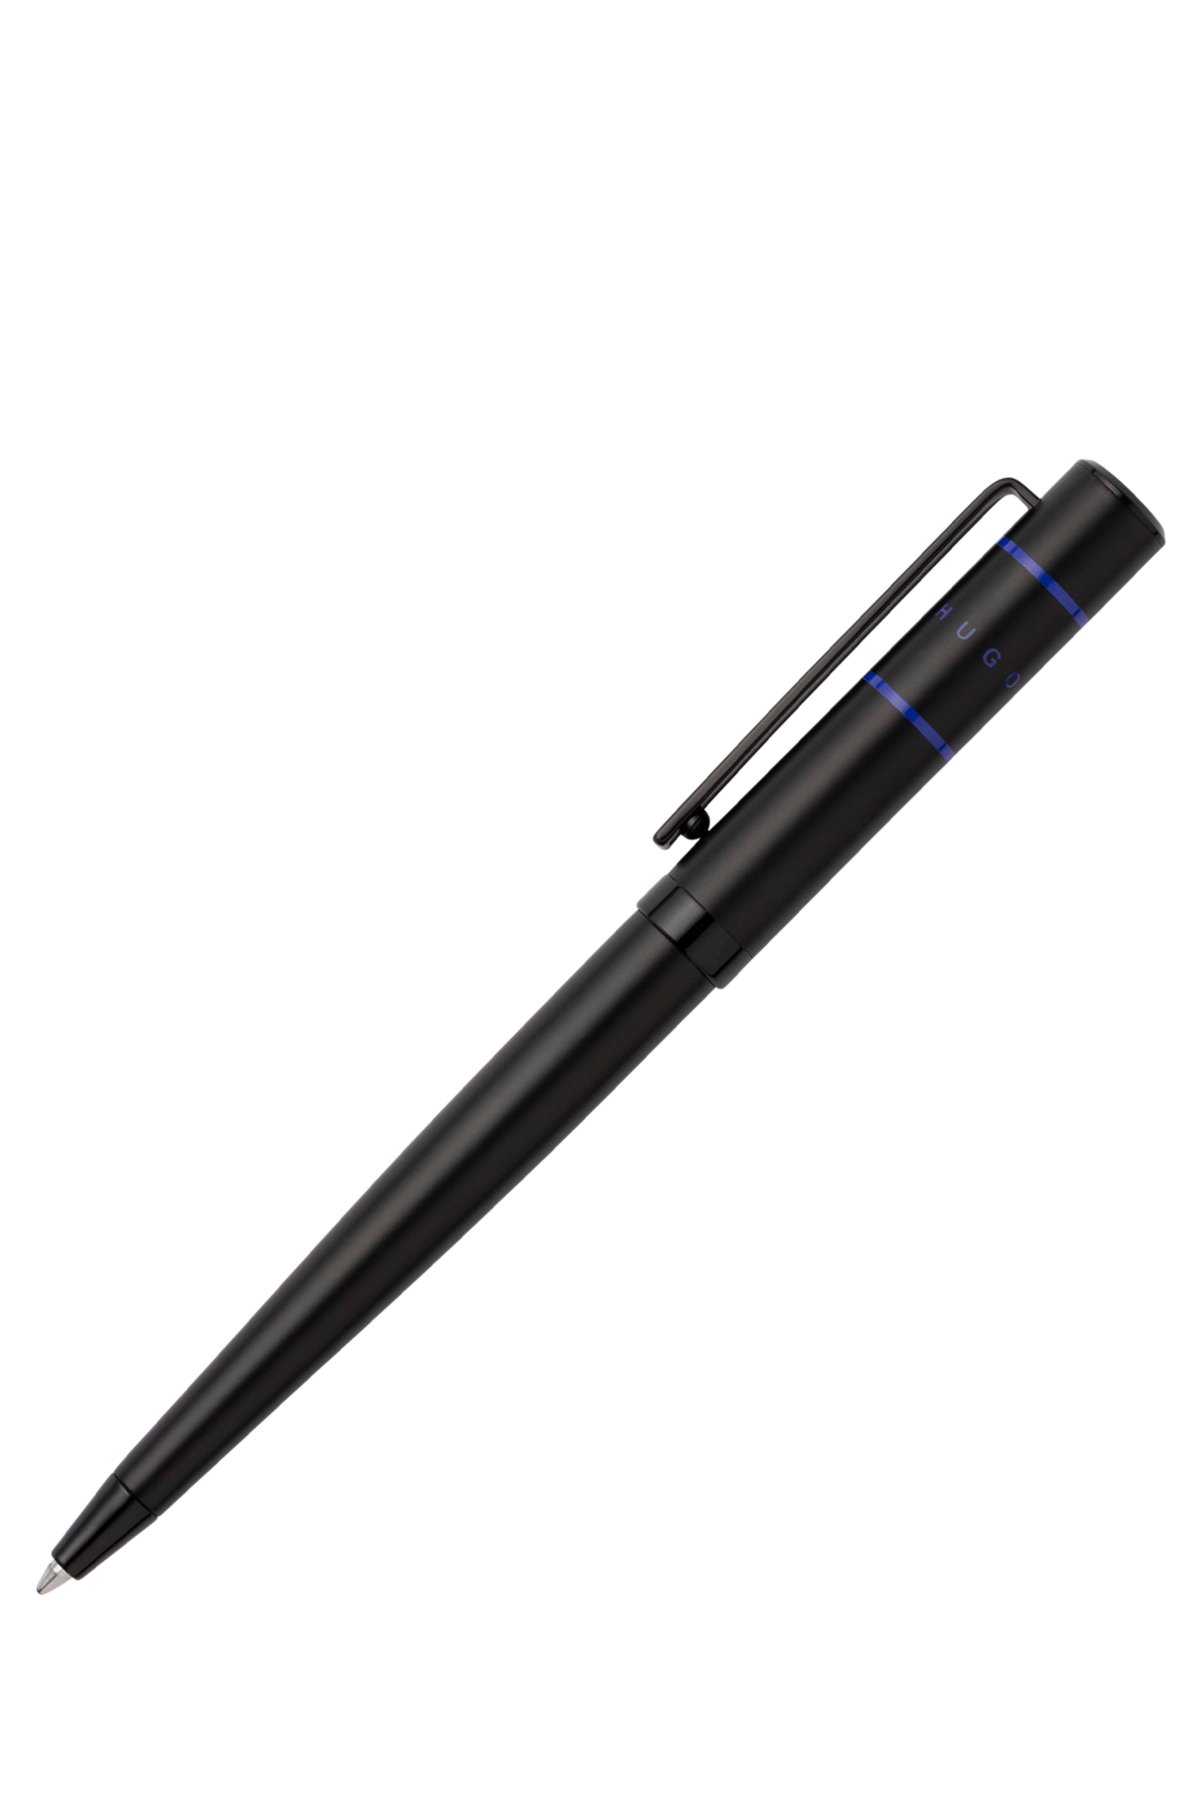 BOSS - Black ballpoint pen with blue lines and logo